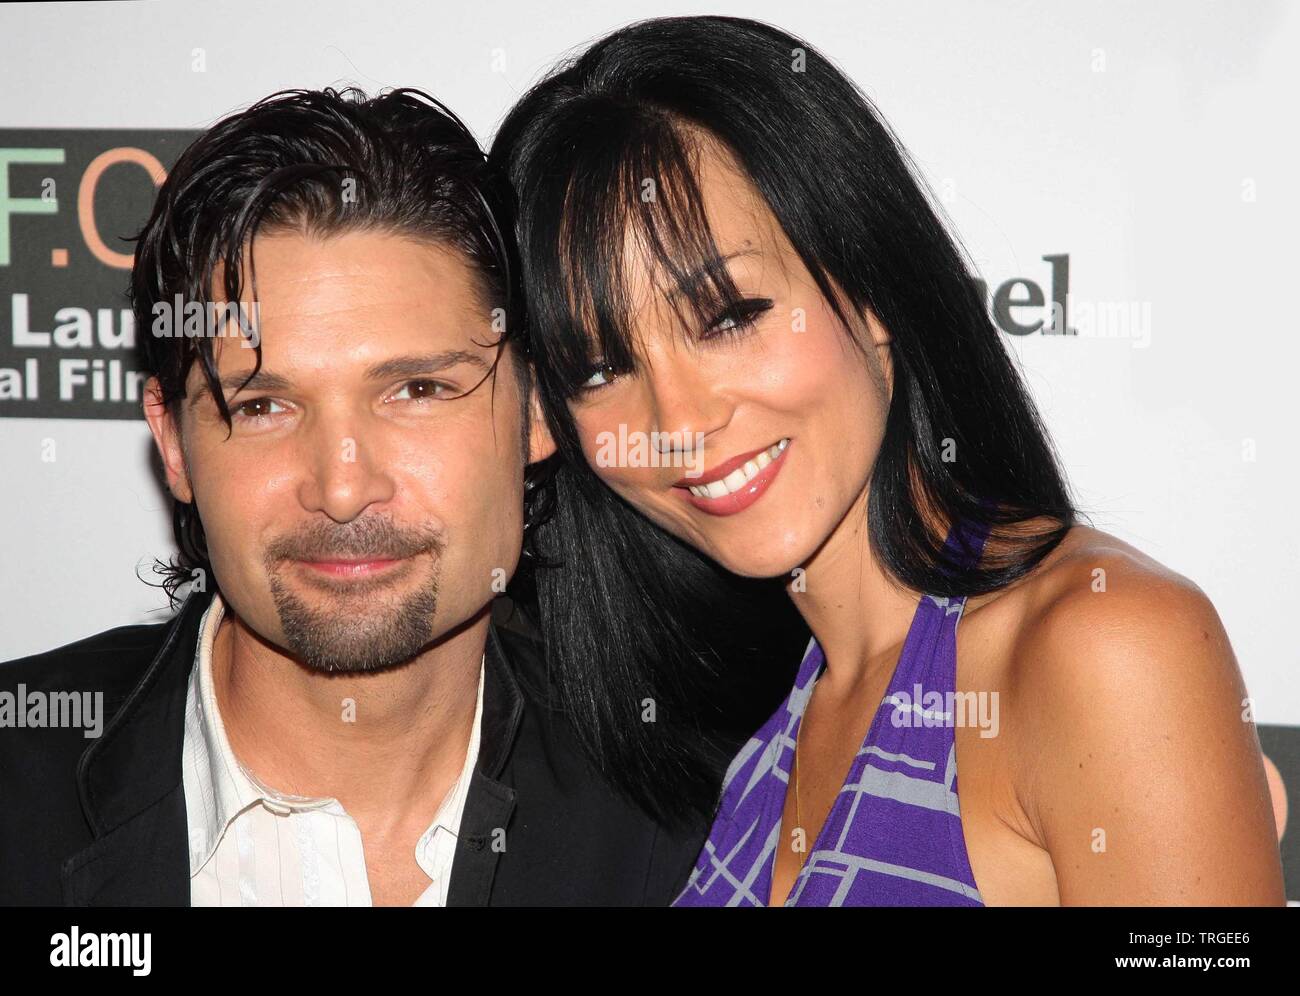 Corey feldman and wife susie feldman hi-res stock photography and images picture image